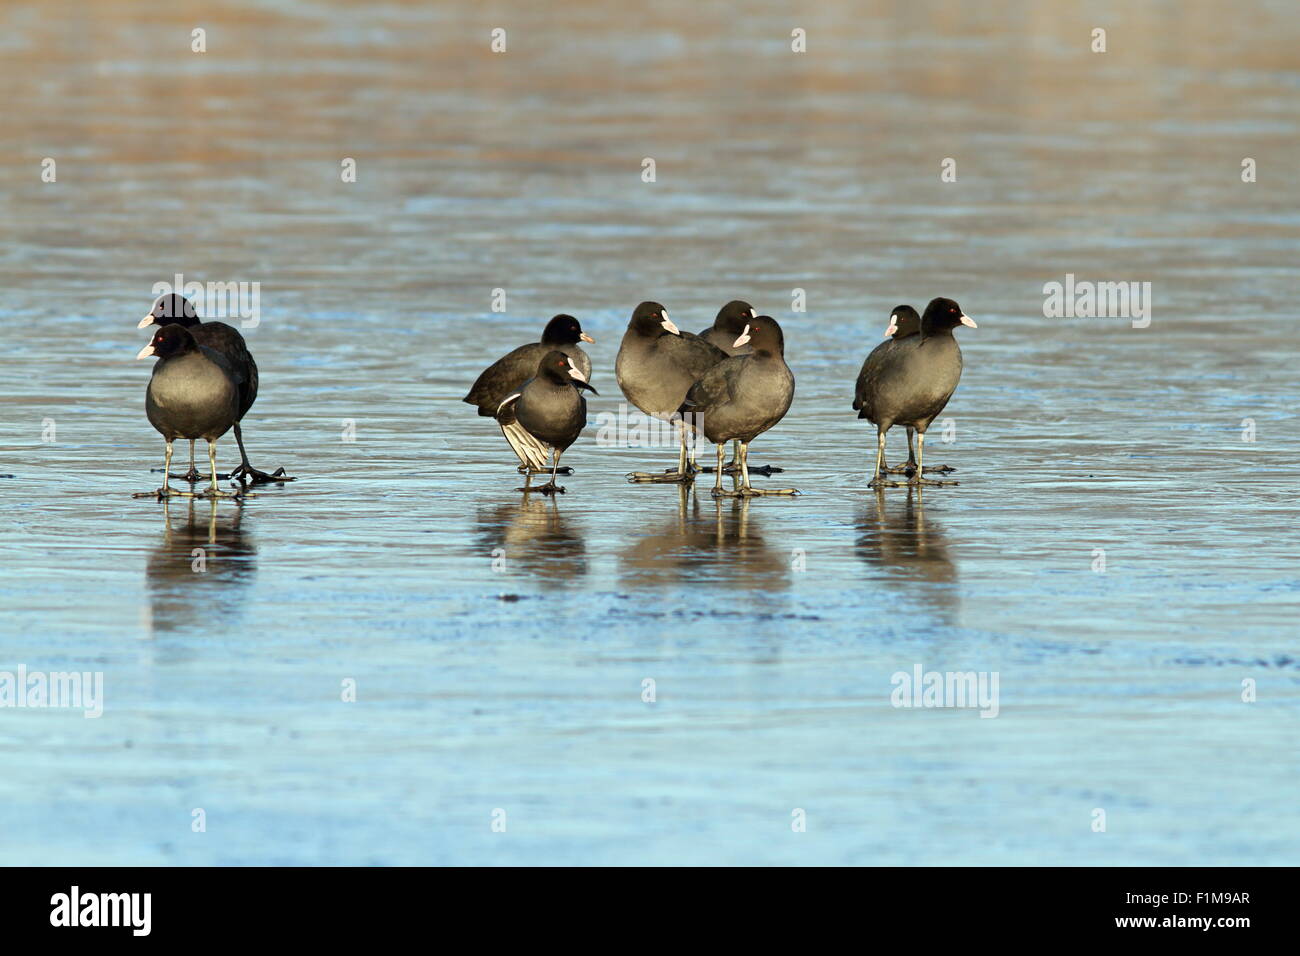 flock black coots on frozen surface, concept with some annoyed birds turning their heads Stock Photo